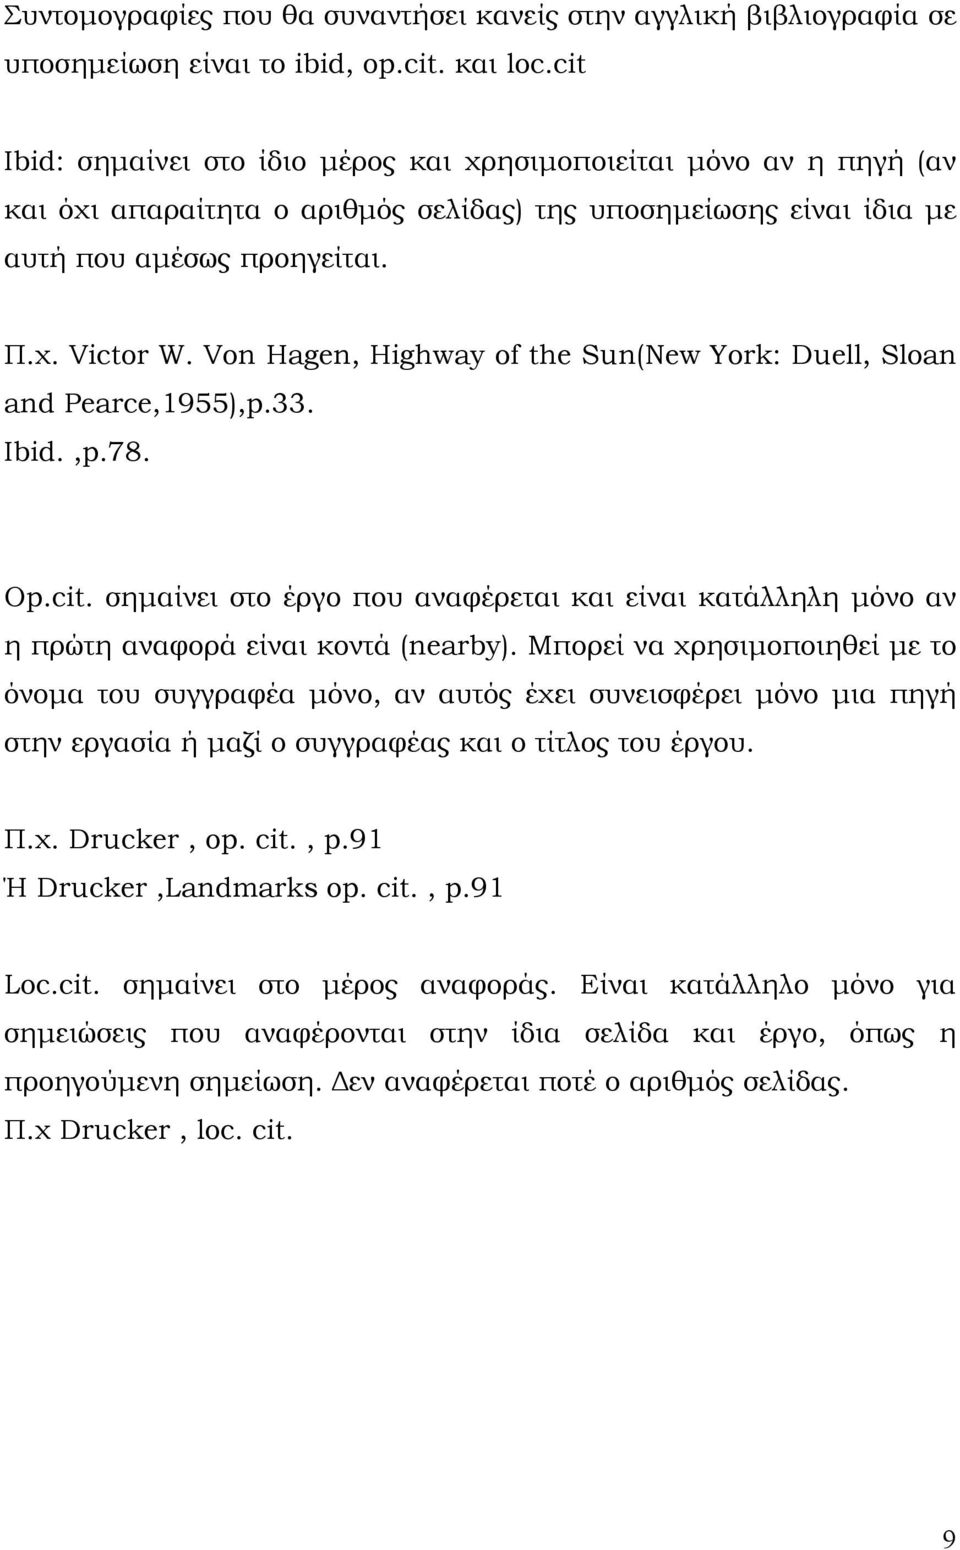 Von Hagen, Highway of the Sun(New York: Duell, Sloan and Pearce,1955),p.33. Ibid.,p.78. Op.cit. σημαίνει στο έργο που αναφέρεται και είναι κατάλληλη μόνο αν η πρώτη αναφορά είναι κοντά (nearby).